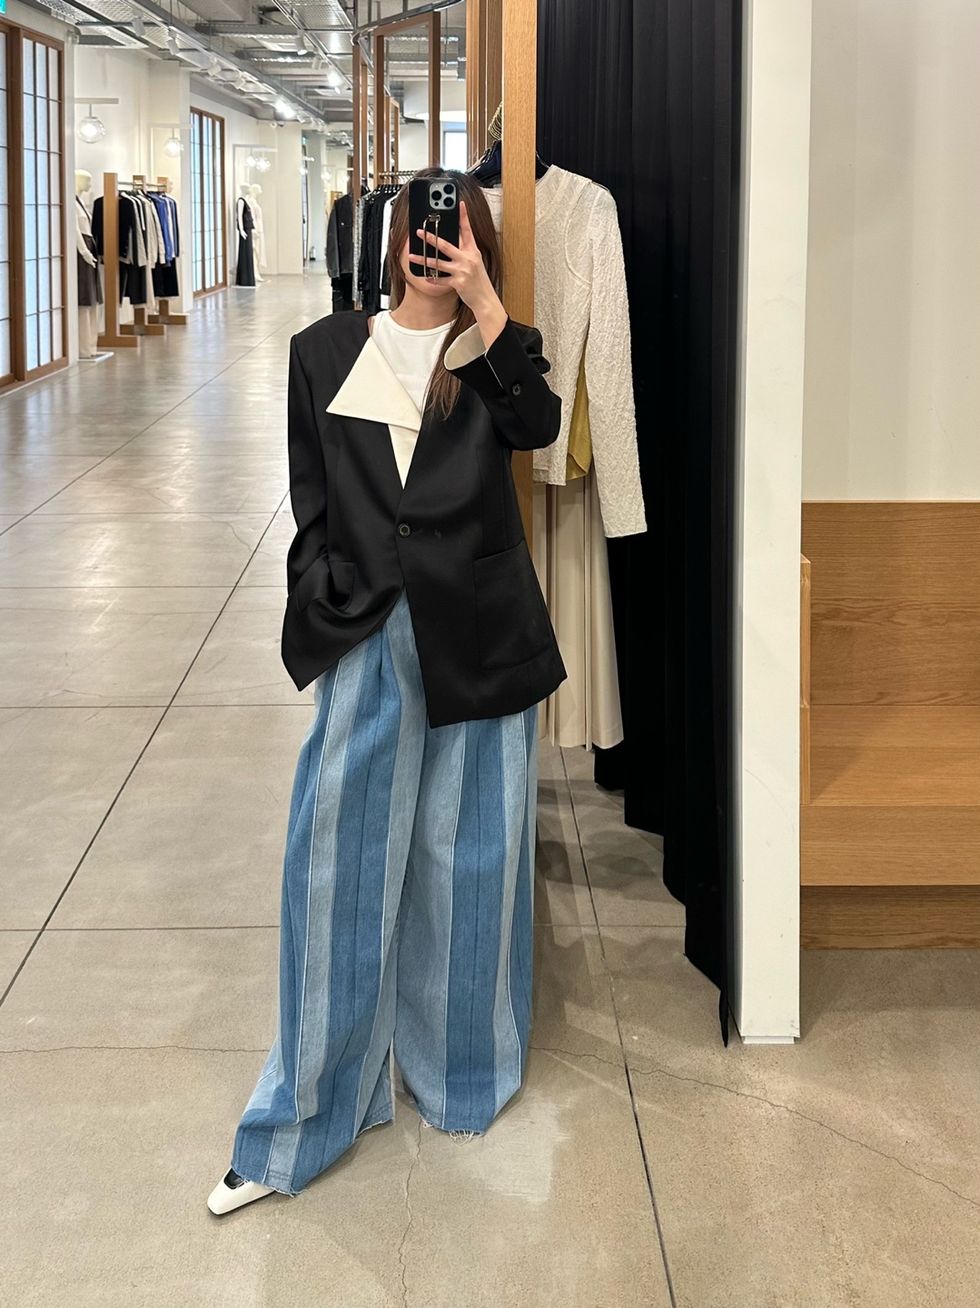 a person taking a selfie in a clothing store